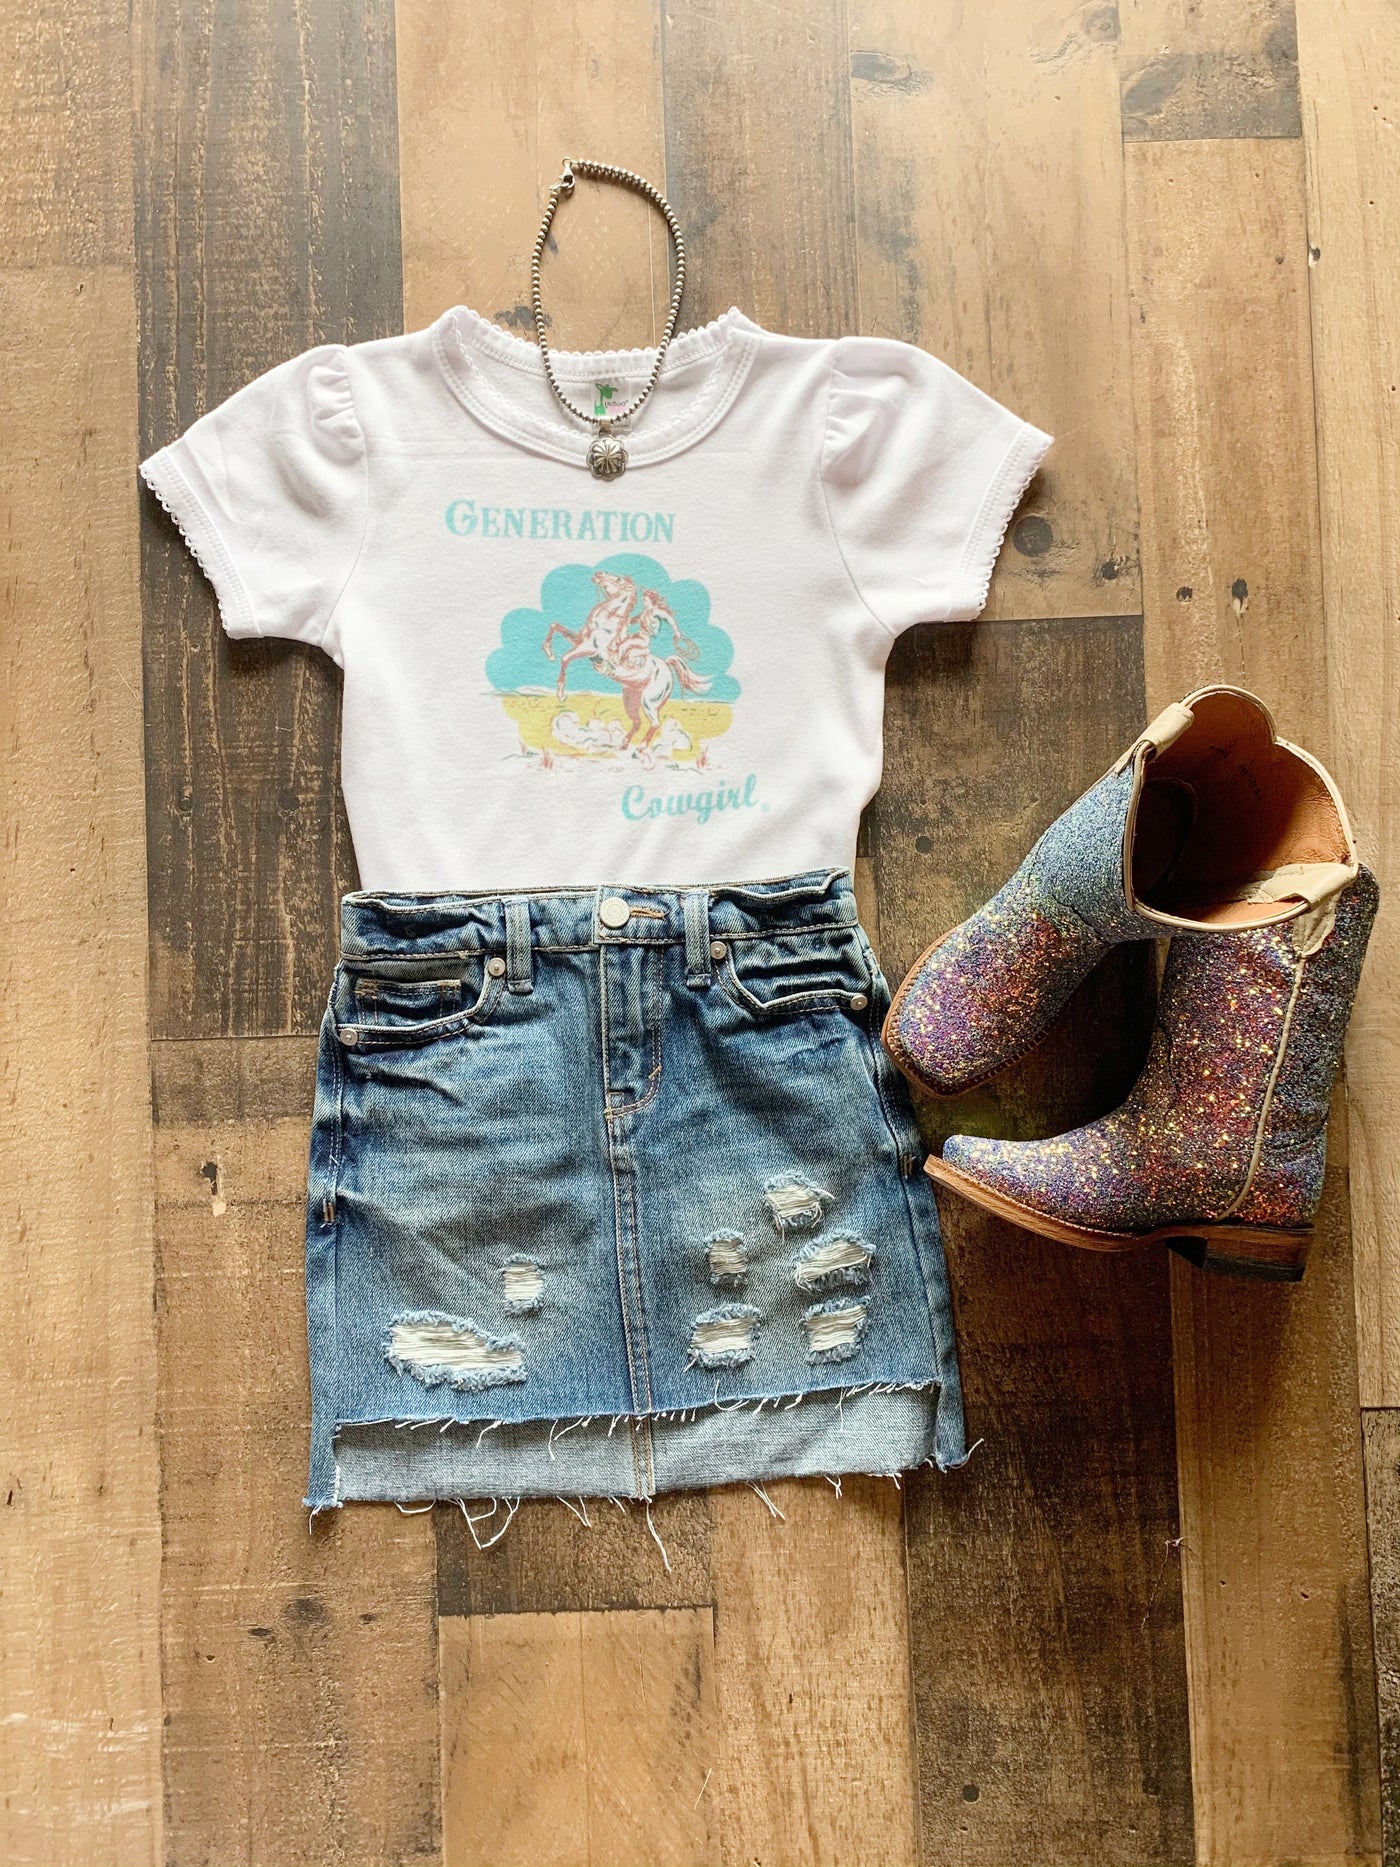 Generation Cowgirl Tee